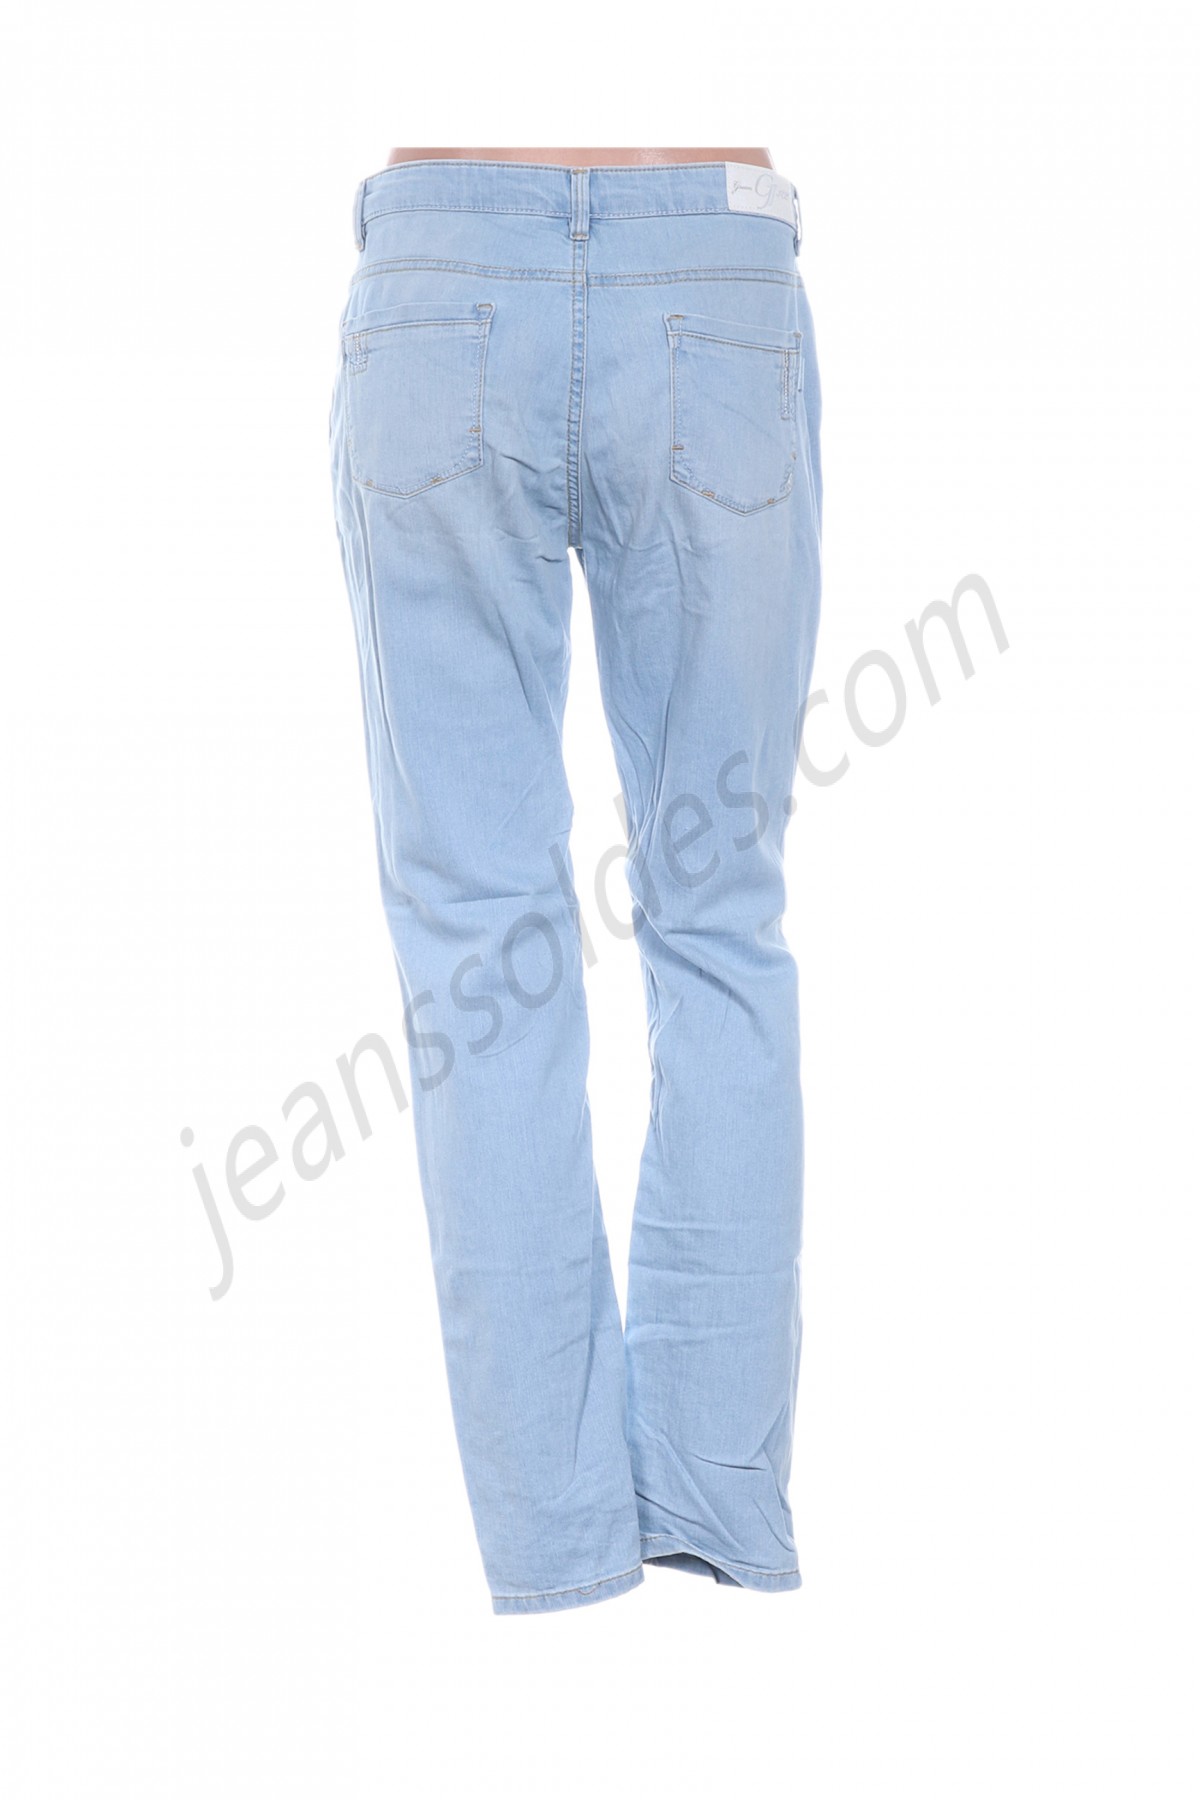 green ice-Jeans coupe slim prix d’amis - -1